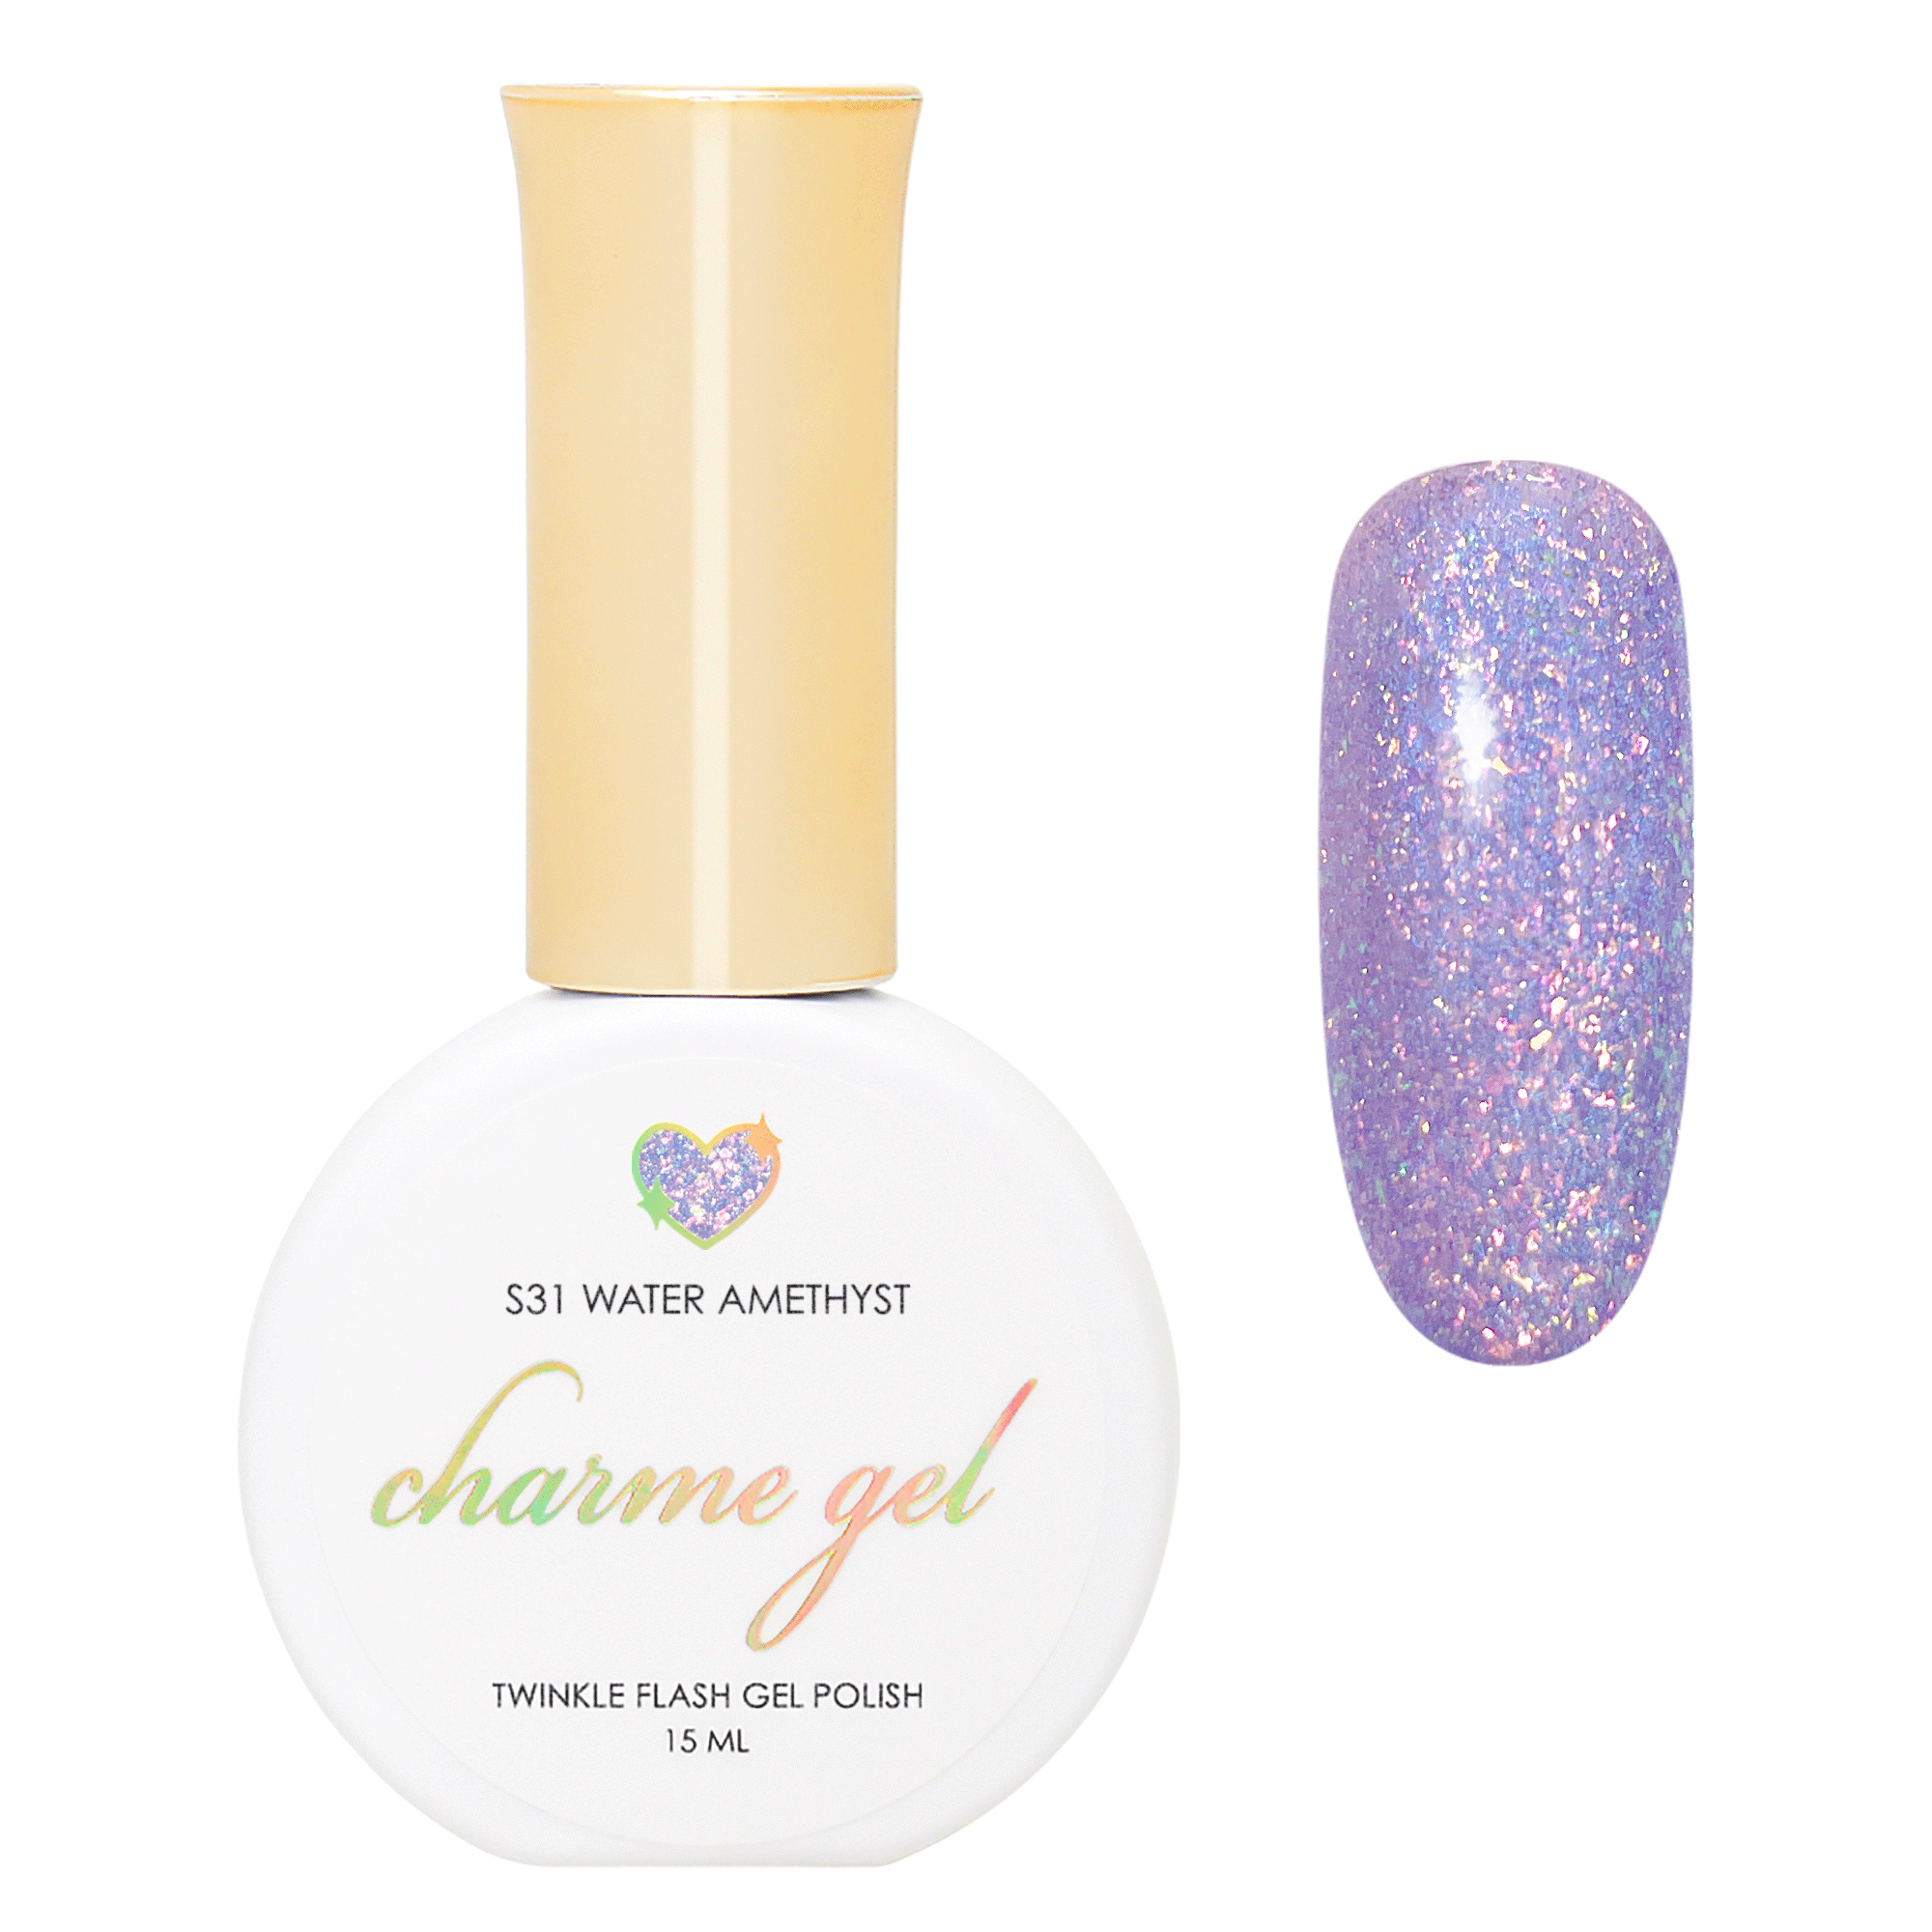 Charme Gel / Twinkle Shimmer S31 Water Amethyst Purple Violet Iridescent Flash Polish Trend Magical